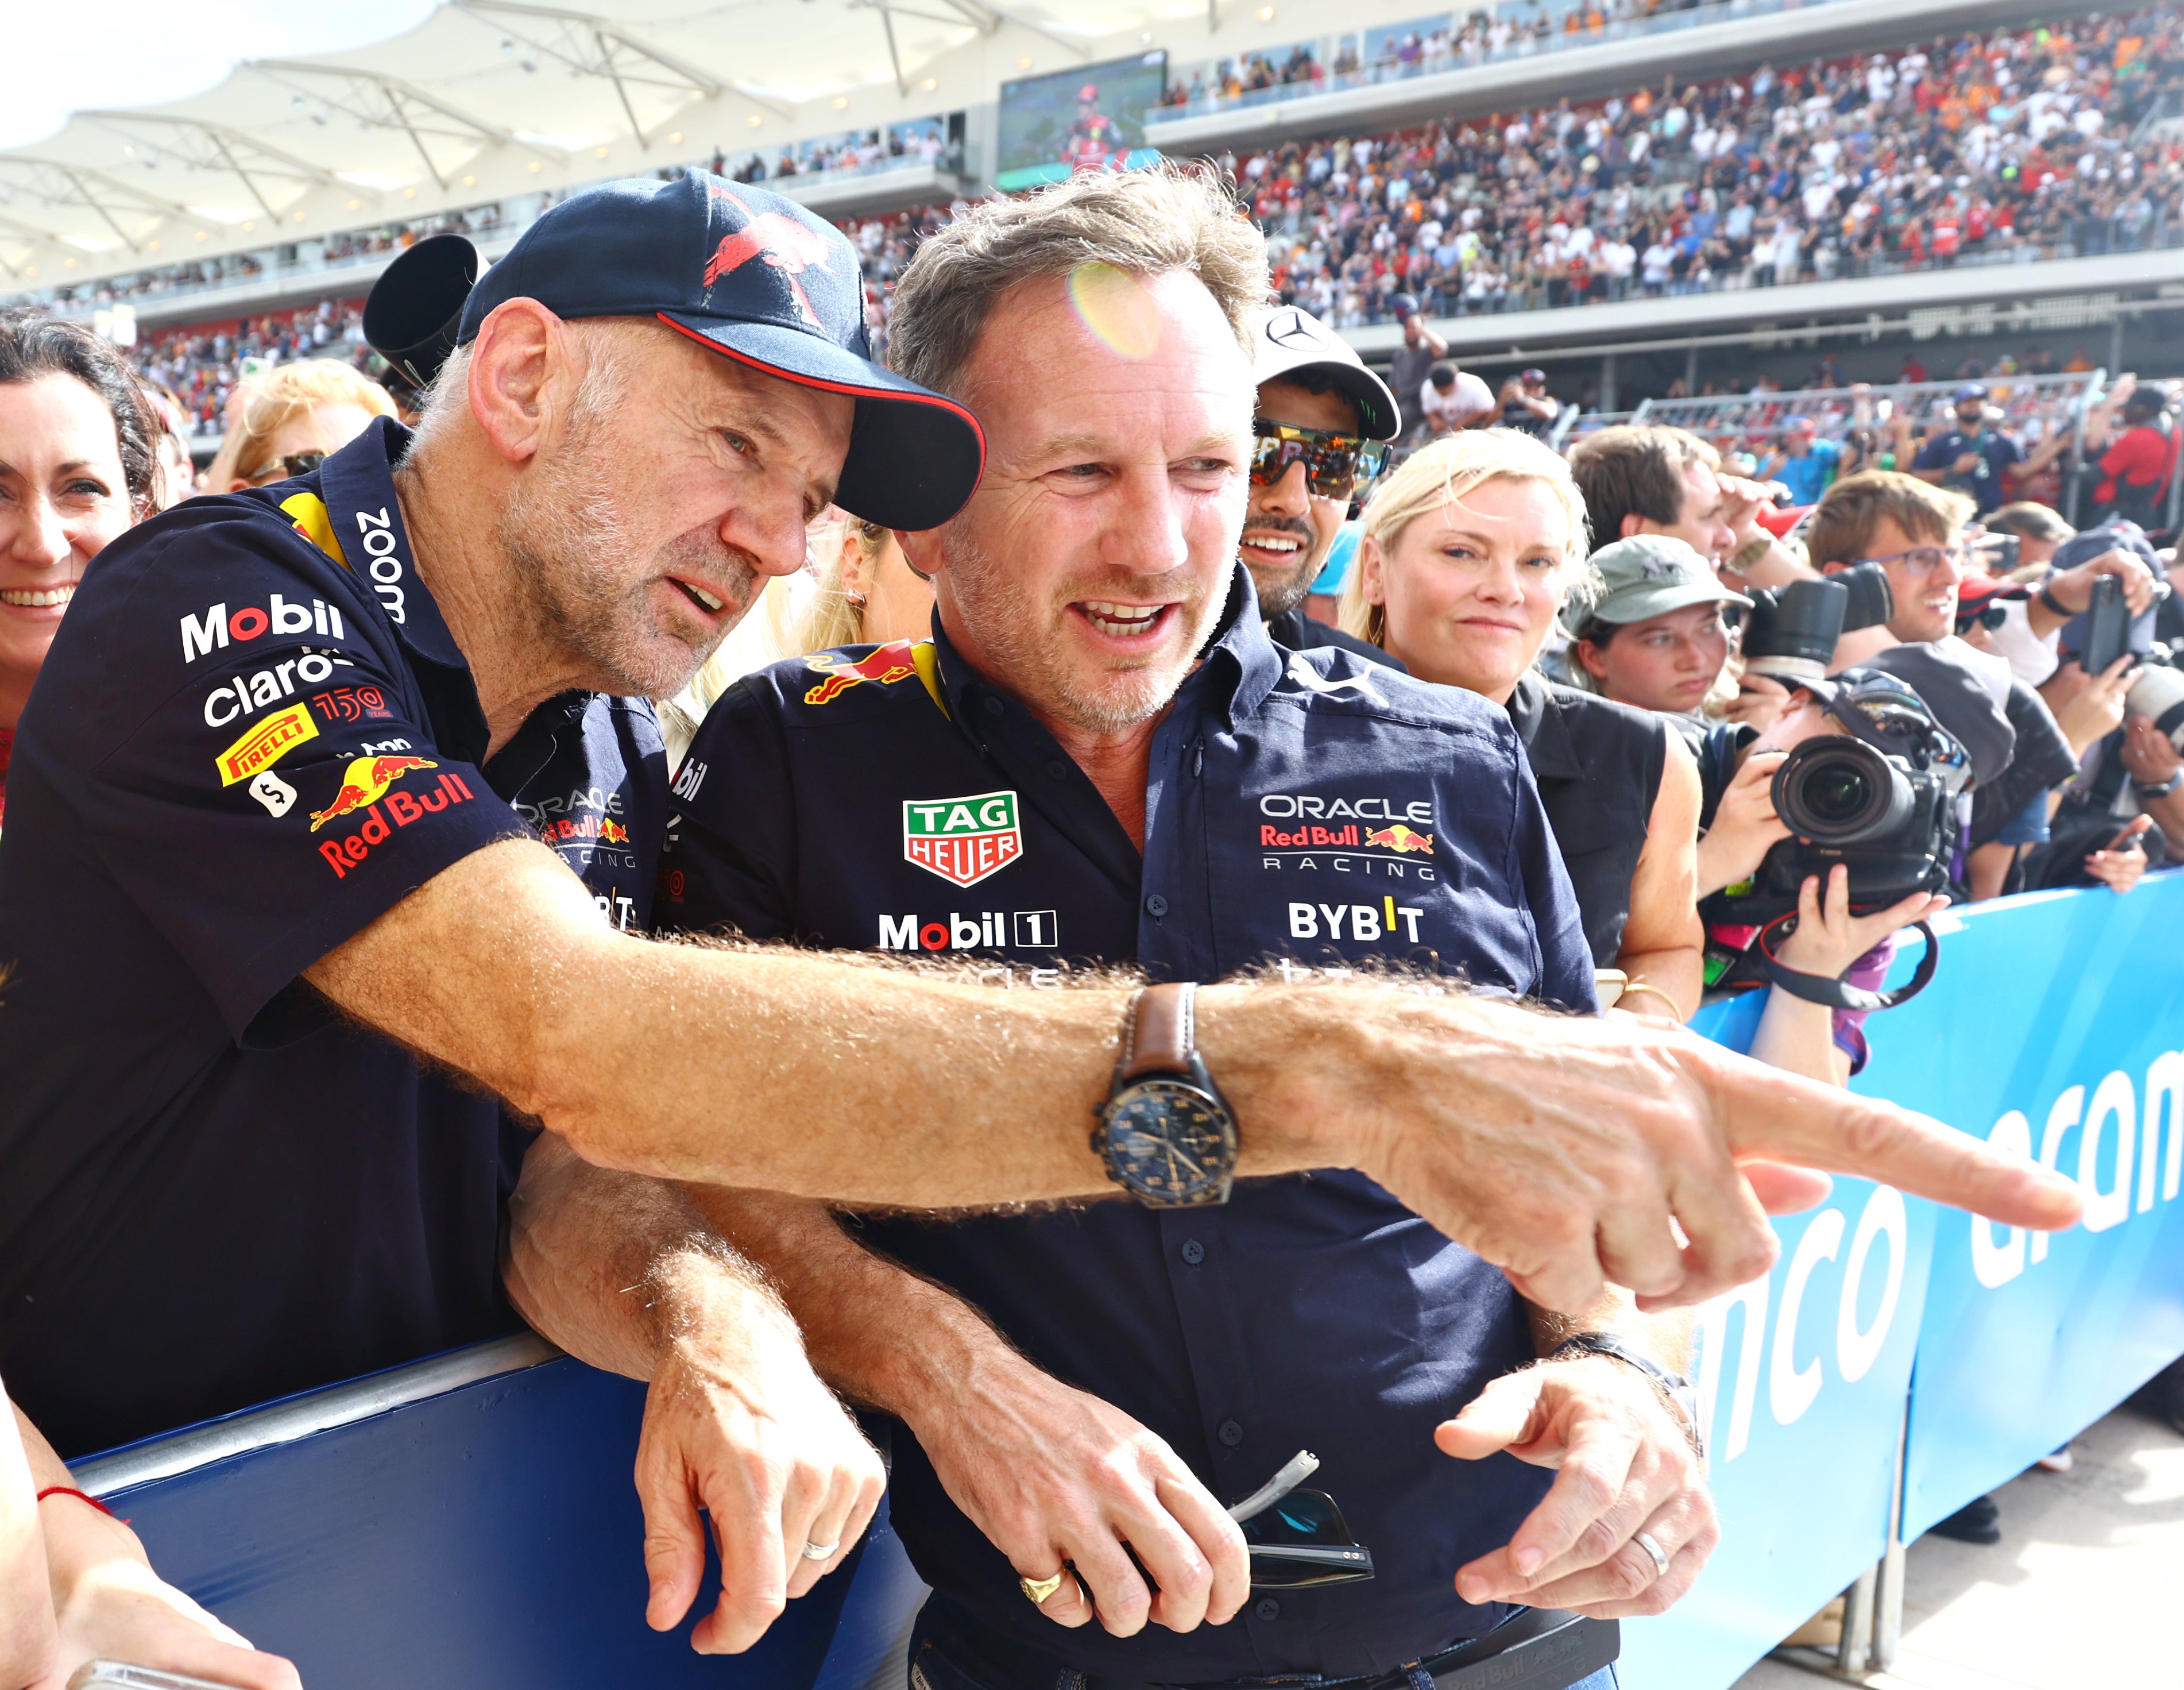 f1: adrian newey leaving red bull is seismic - repercussions for christian horner could be huge